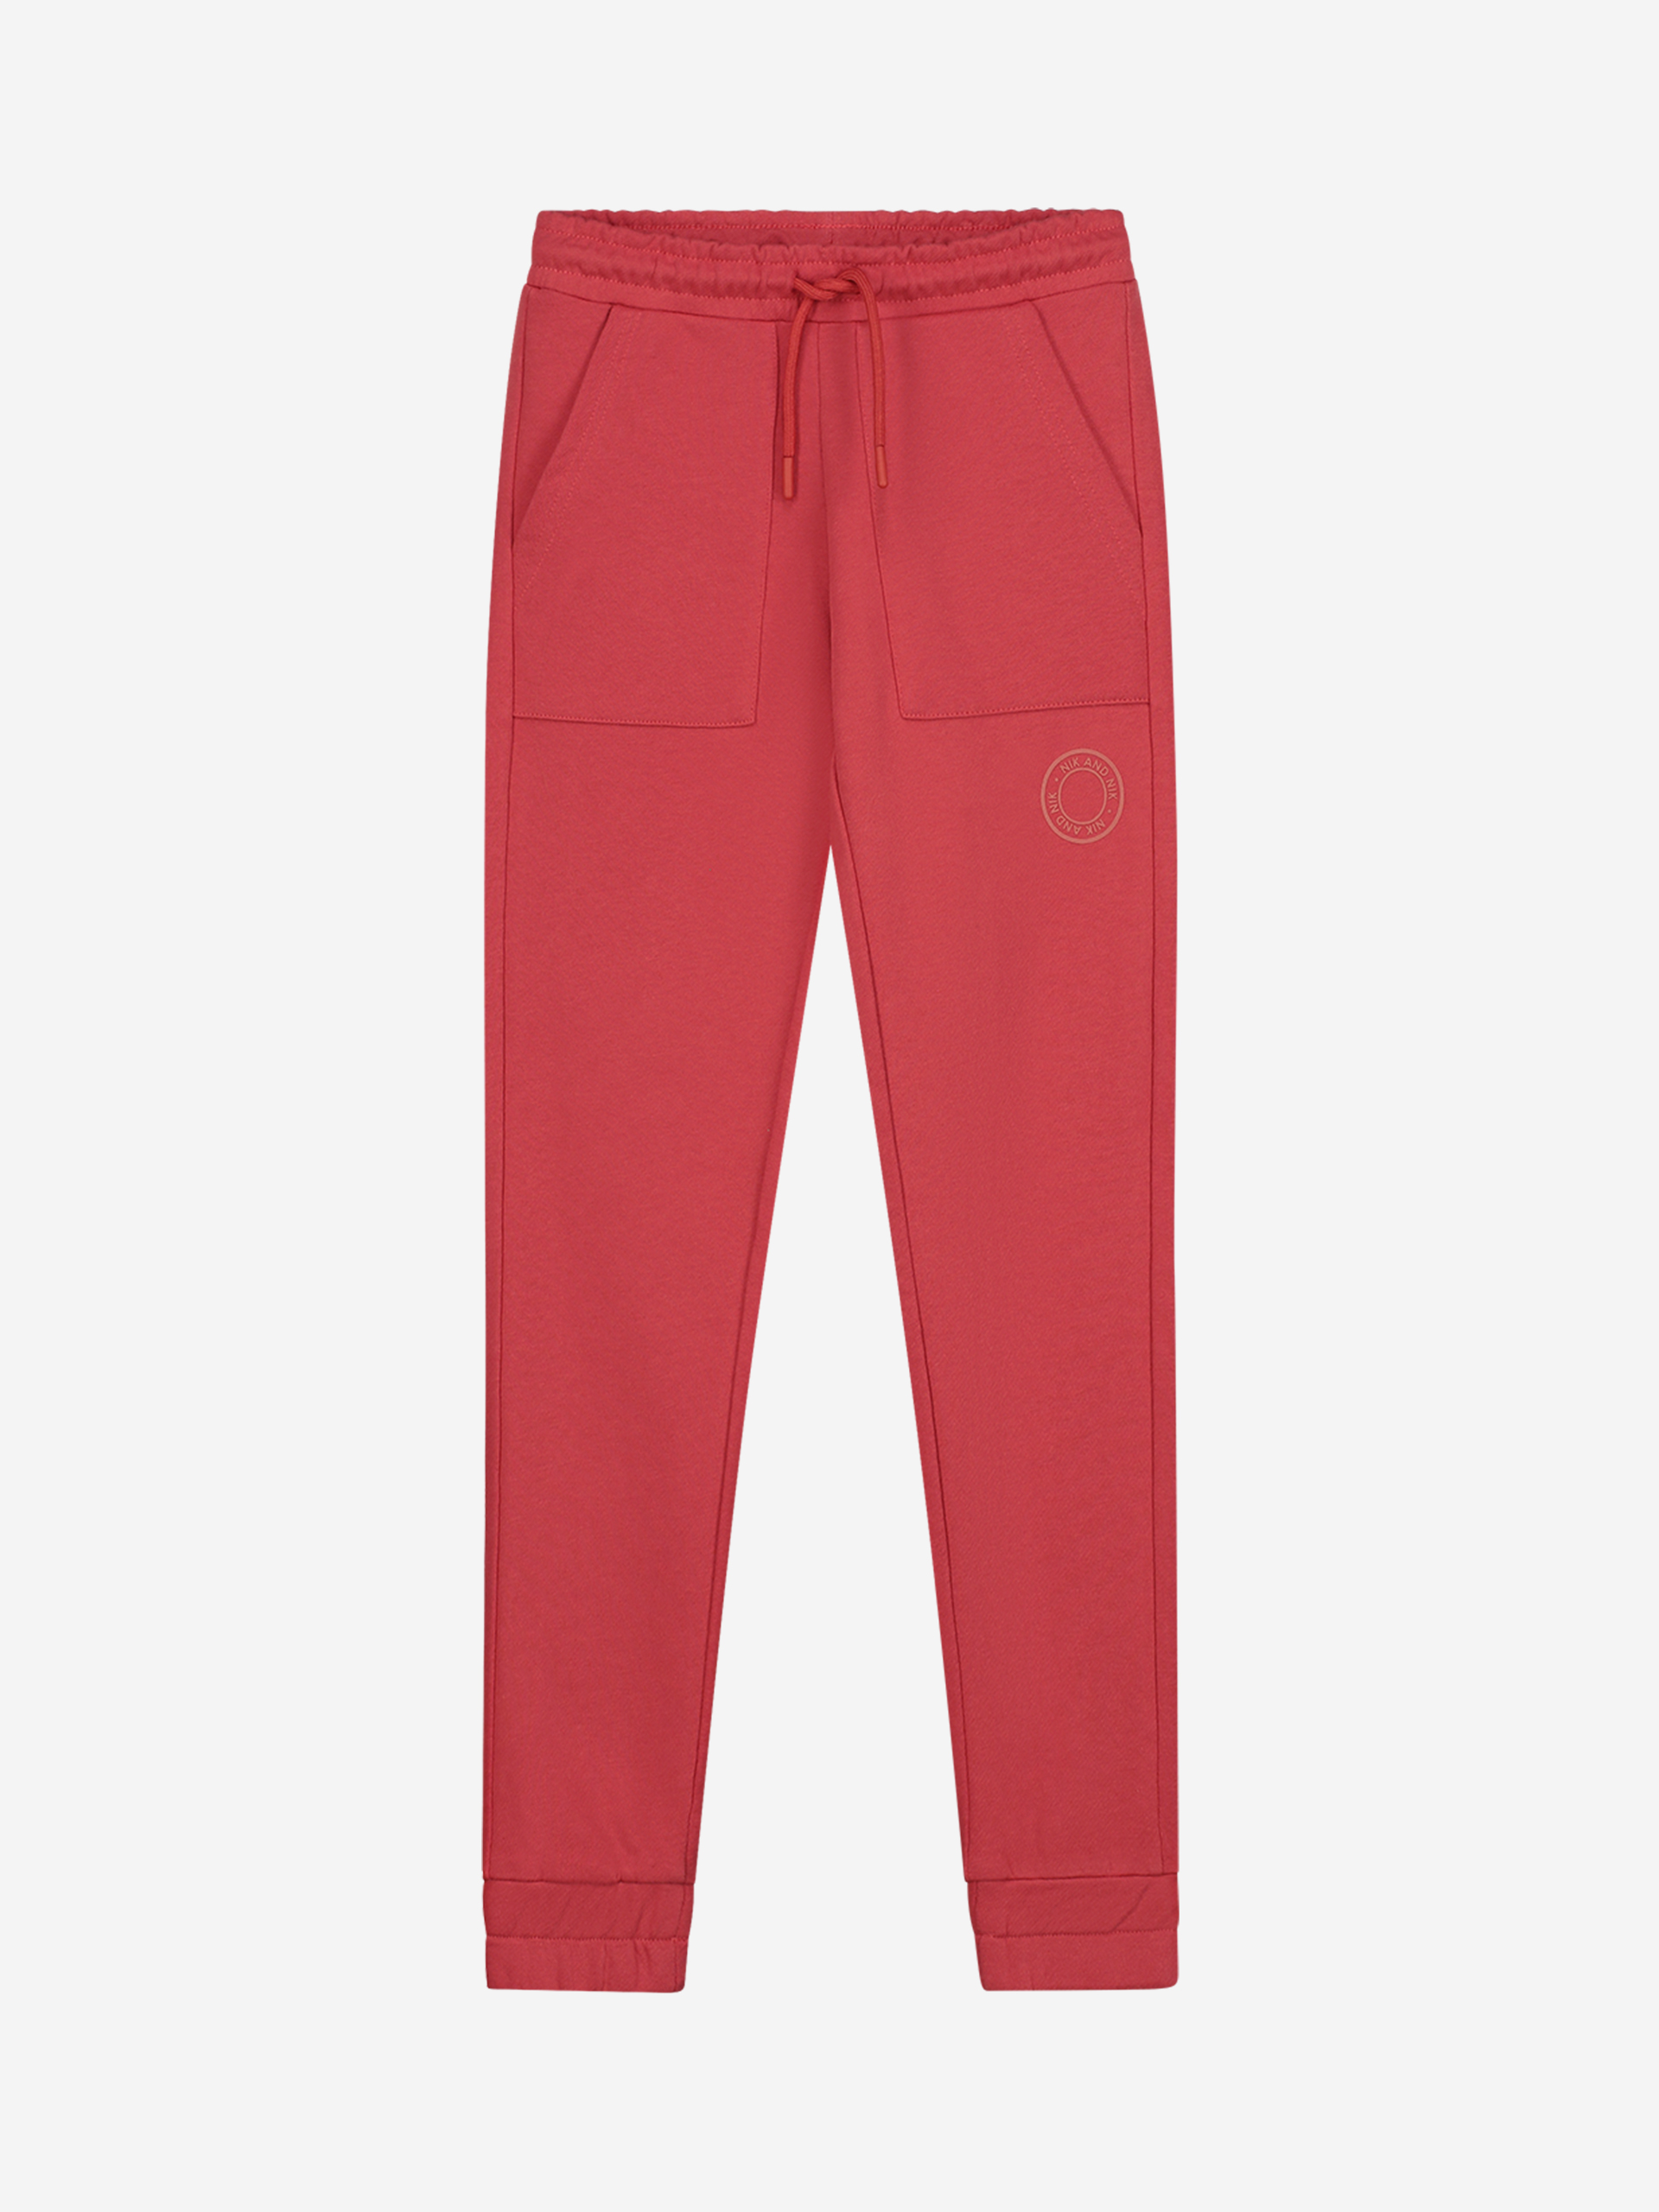 Fitted sweatpants with high waist  